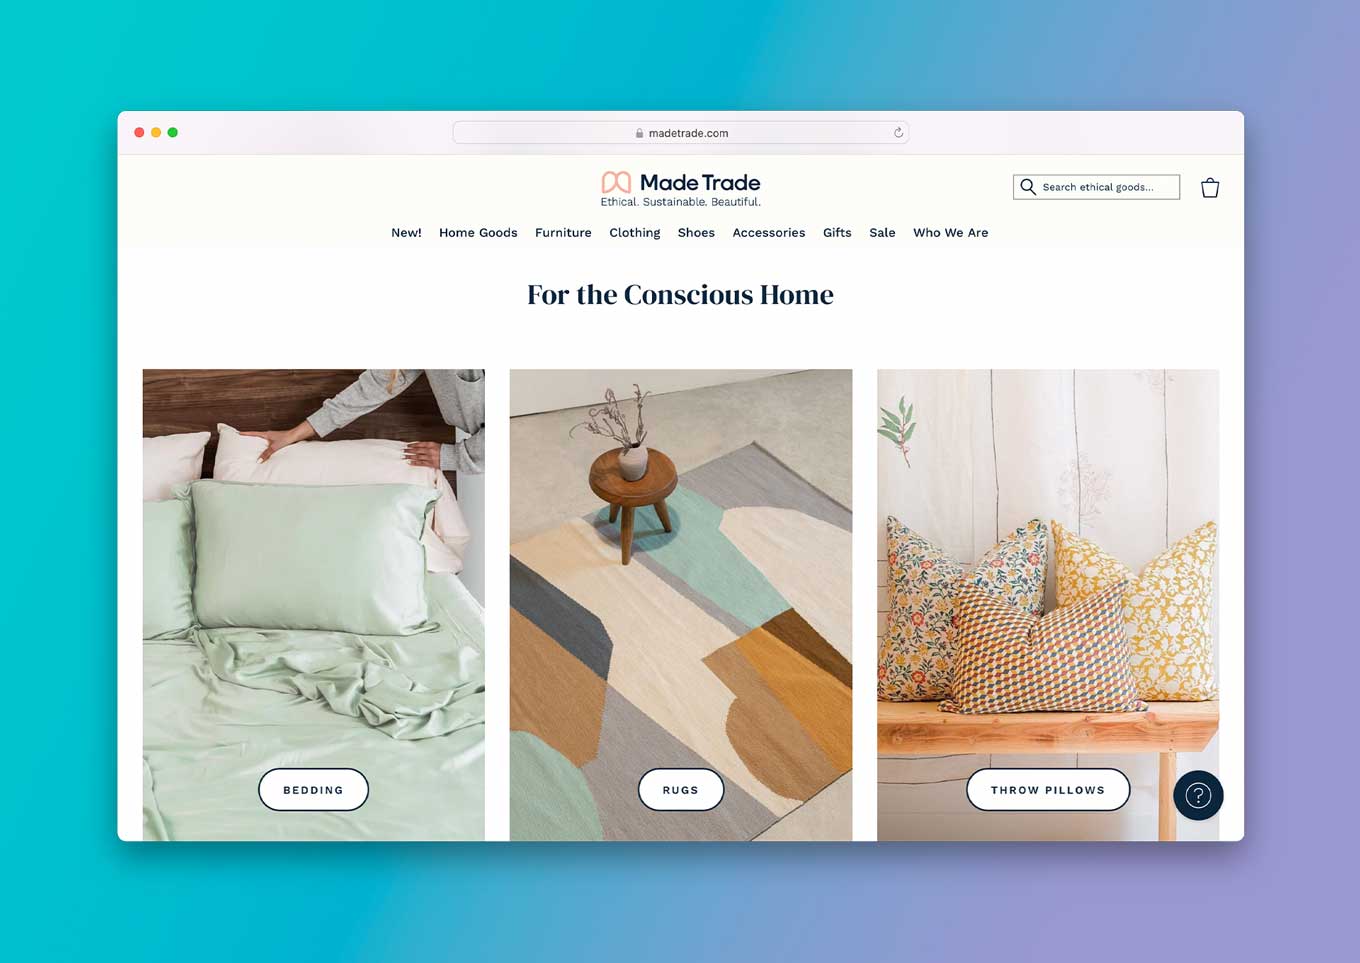 Made Trade Website: "Ethical. Sustainable. Beautiful" / "For the Conscious Home"